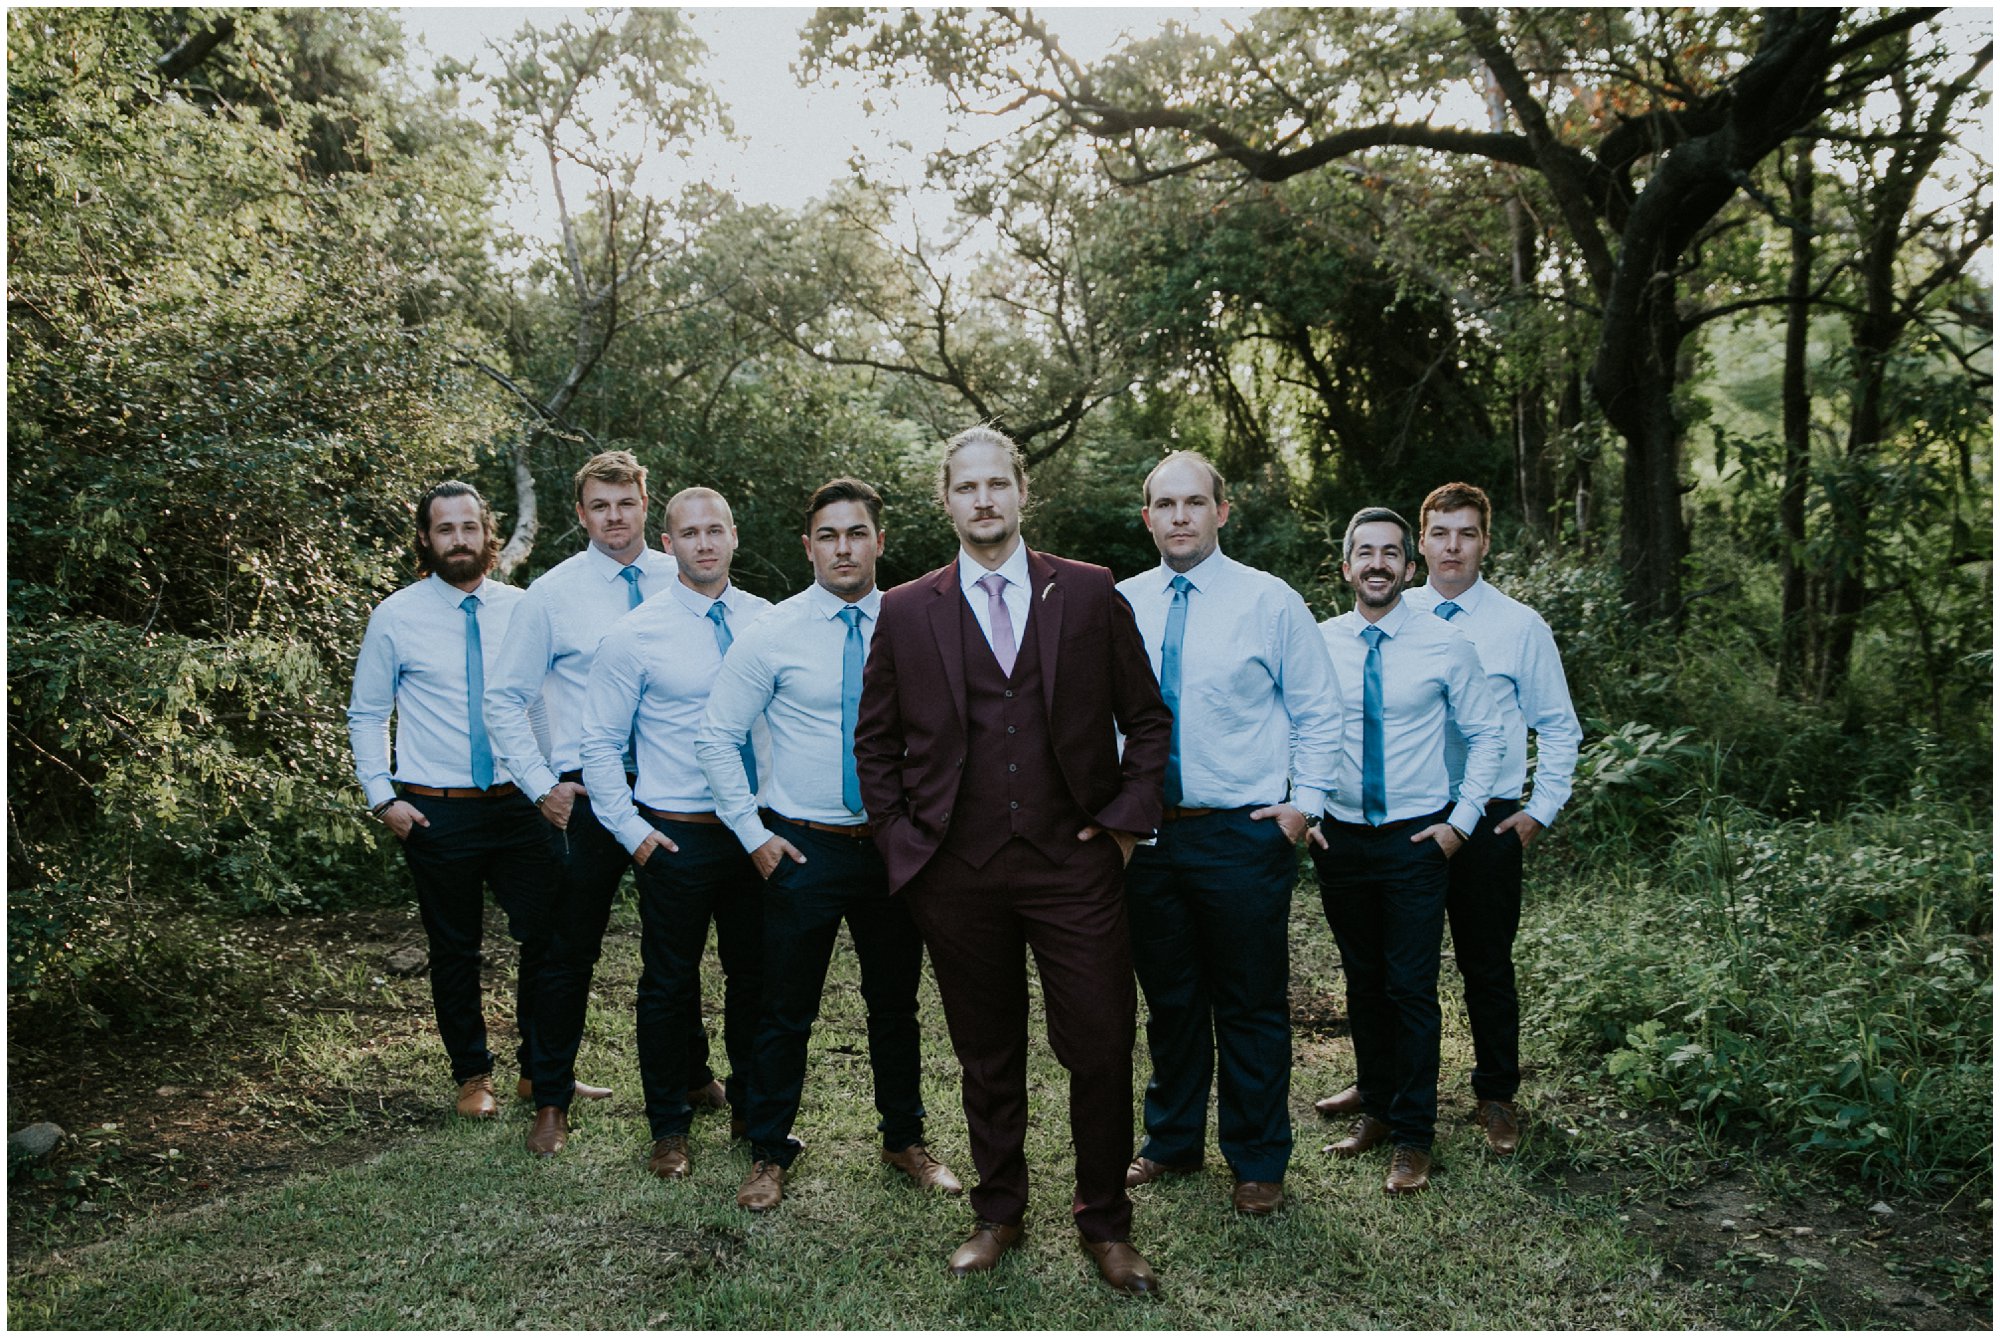 Ceremony at an Outdoor Bohemian Destination Wedding at Francine’s Venue in Hoedspruit Limpopo by Junebug World's Best Photographer Maryke Albertyn Award Winning International Alternative Moody Photography based in Cape Town South Africa Groom and Groomsmen